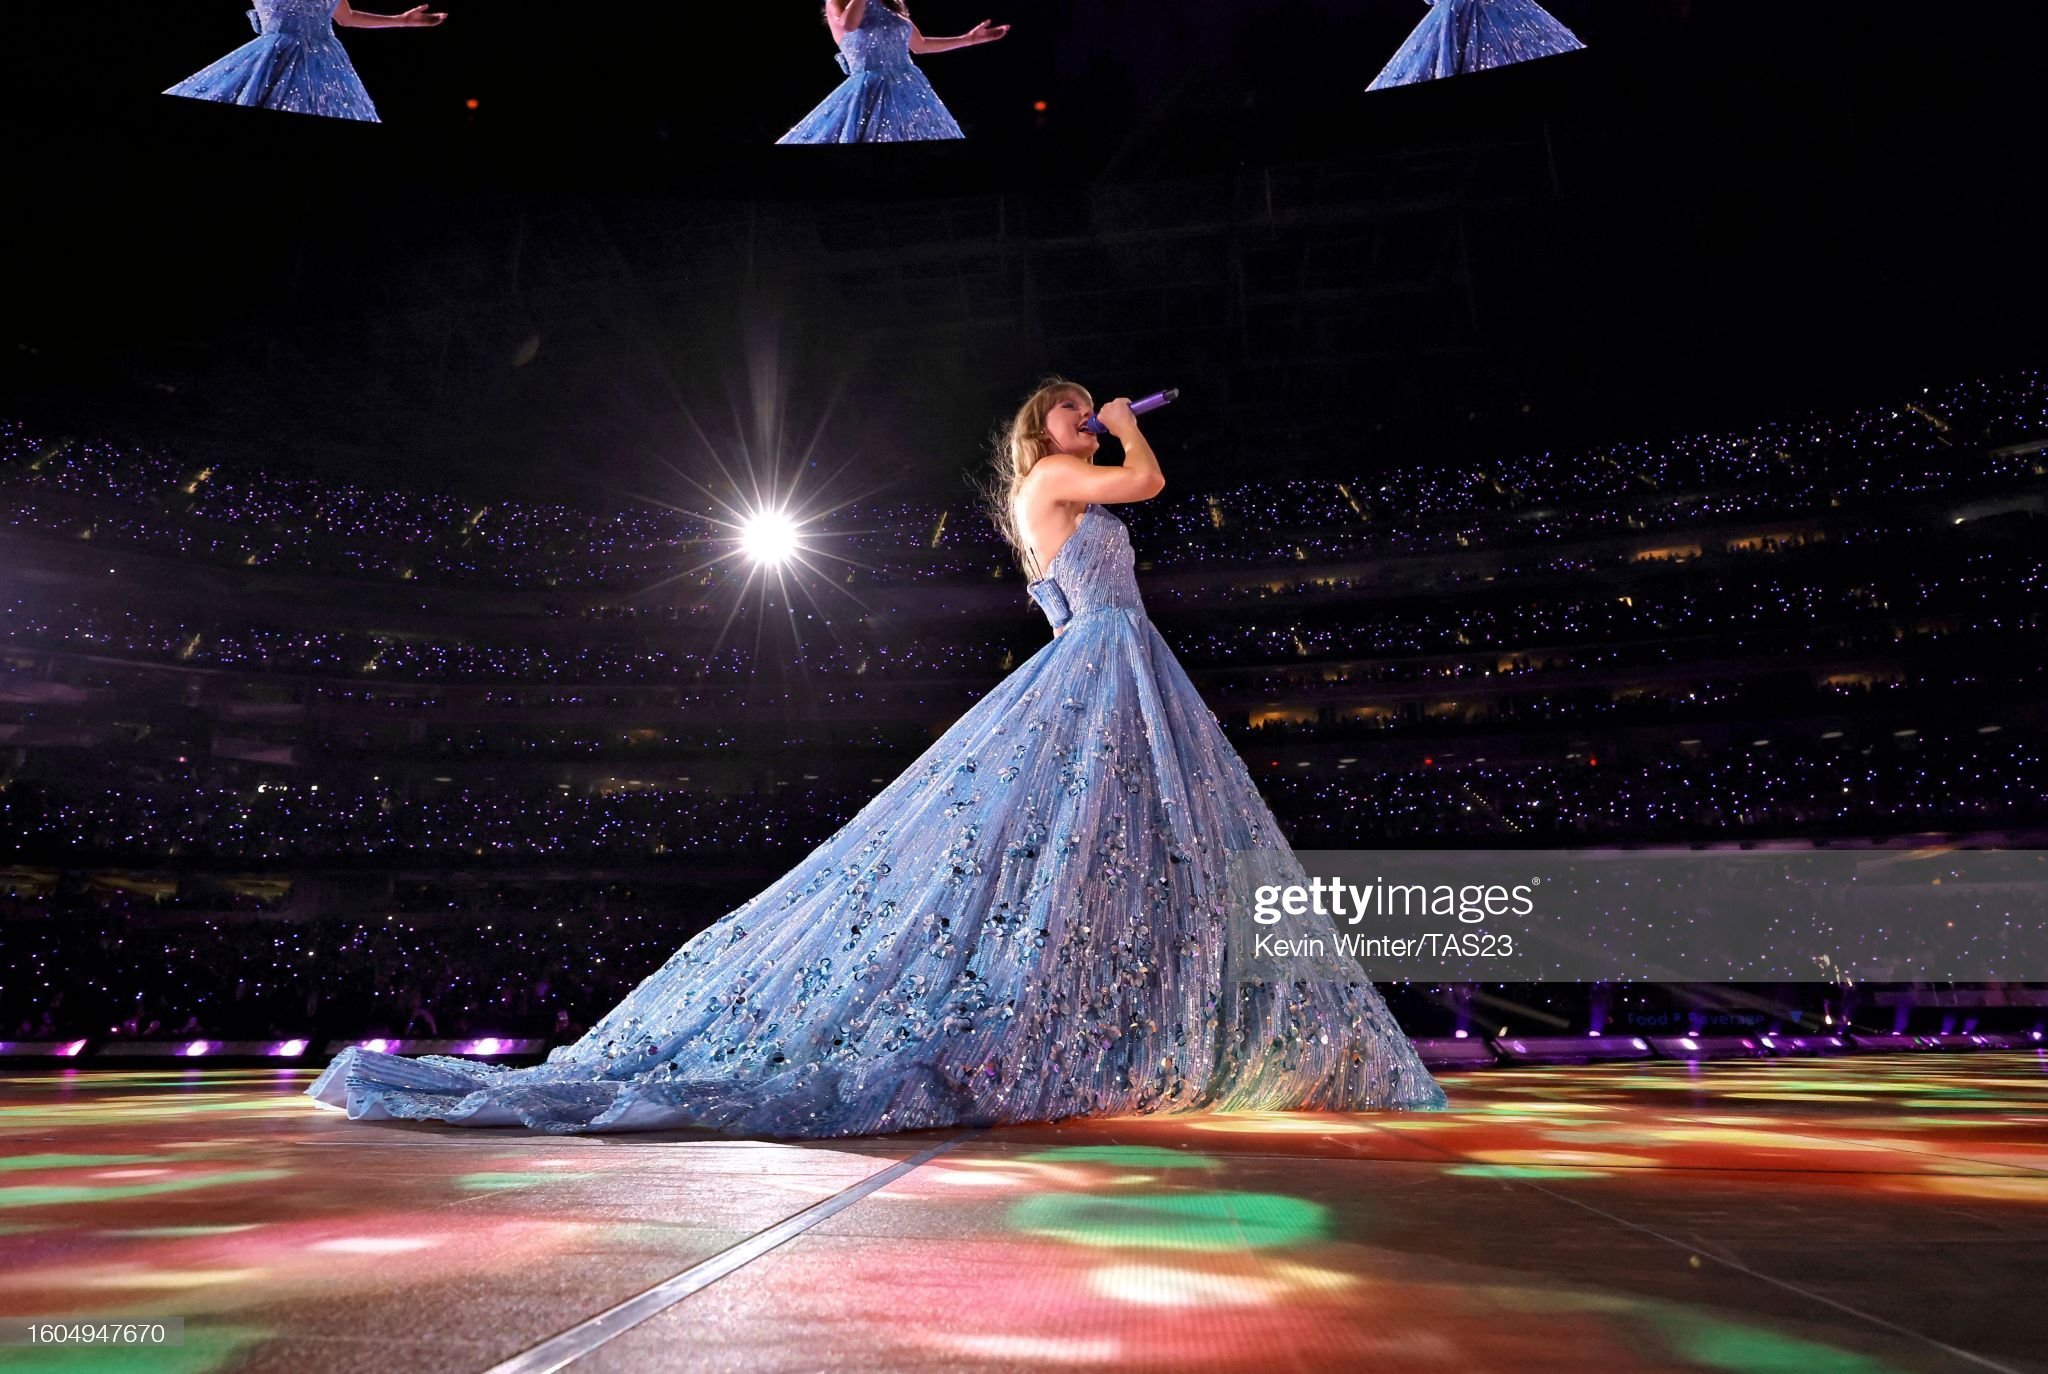 gettyimages-1604947670-2048x2048.jpg